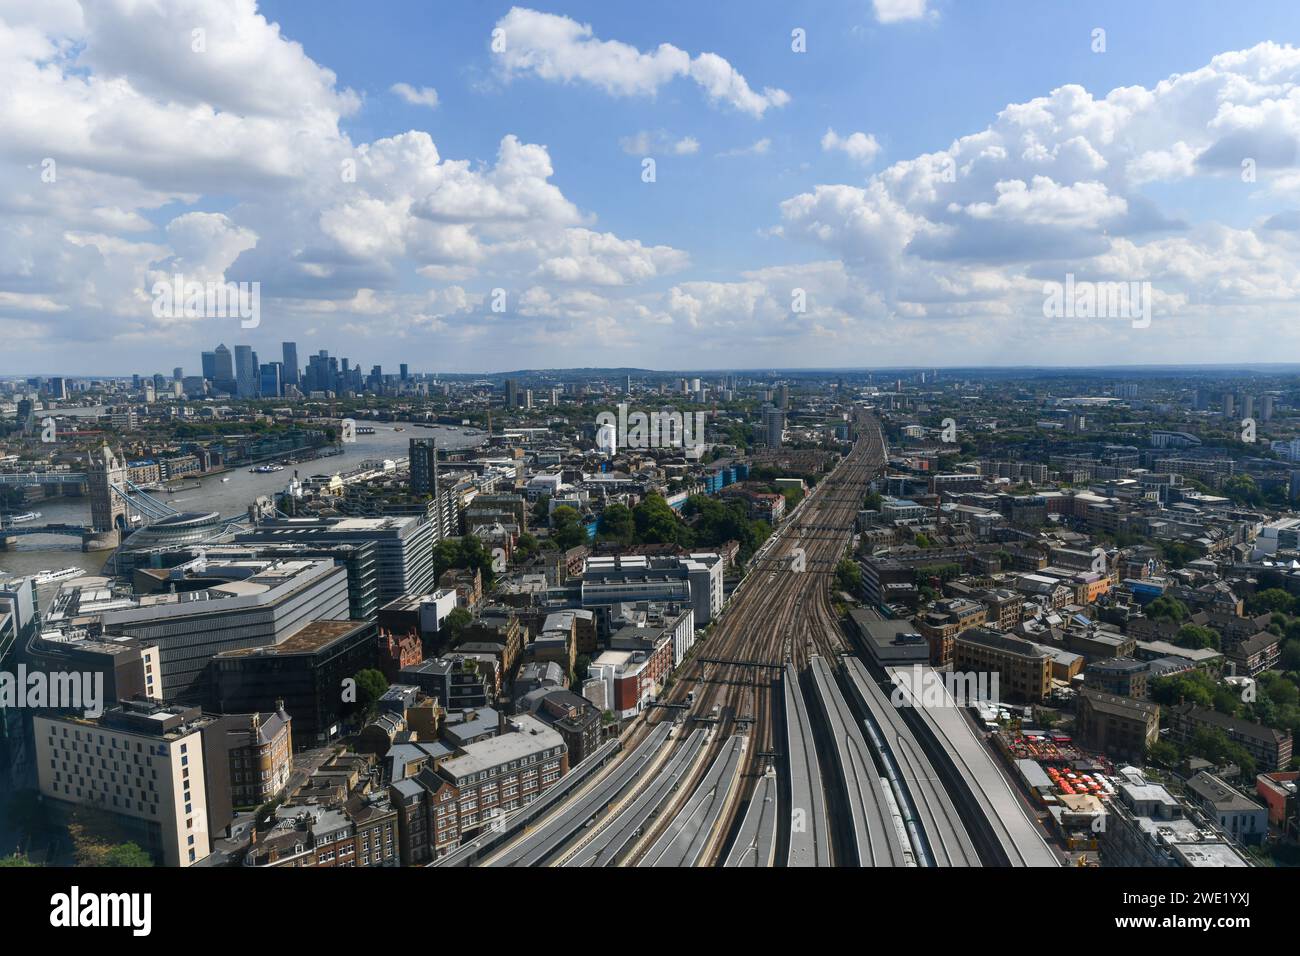 Aerial view of train tracks entering Waterloo Station in London, UK. Stock Photo